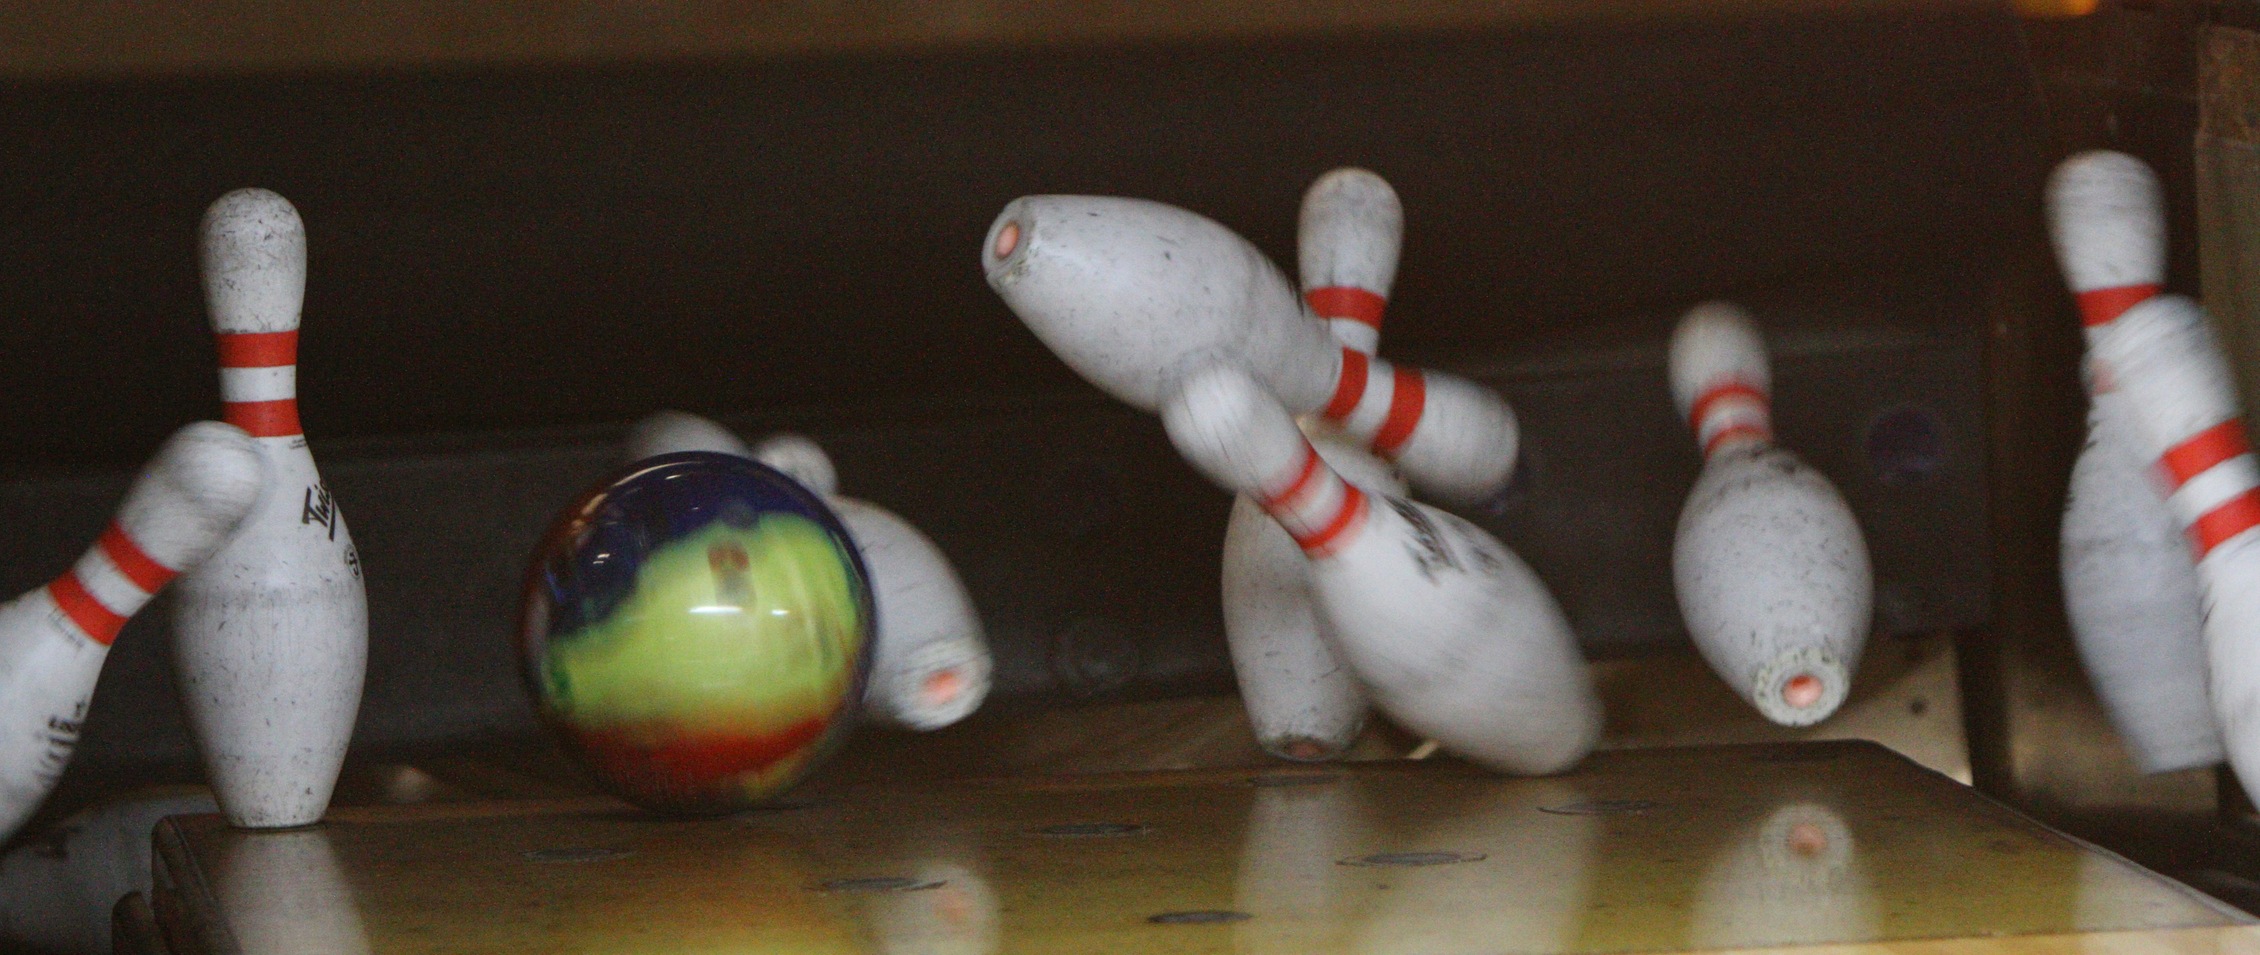 Bowling pins being knocked down